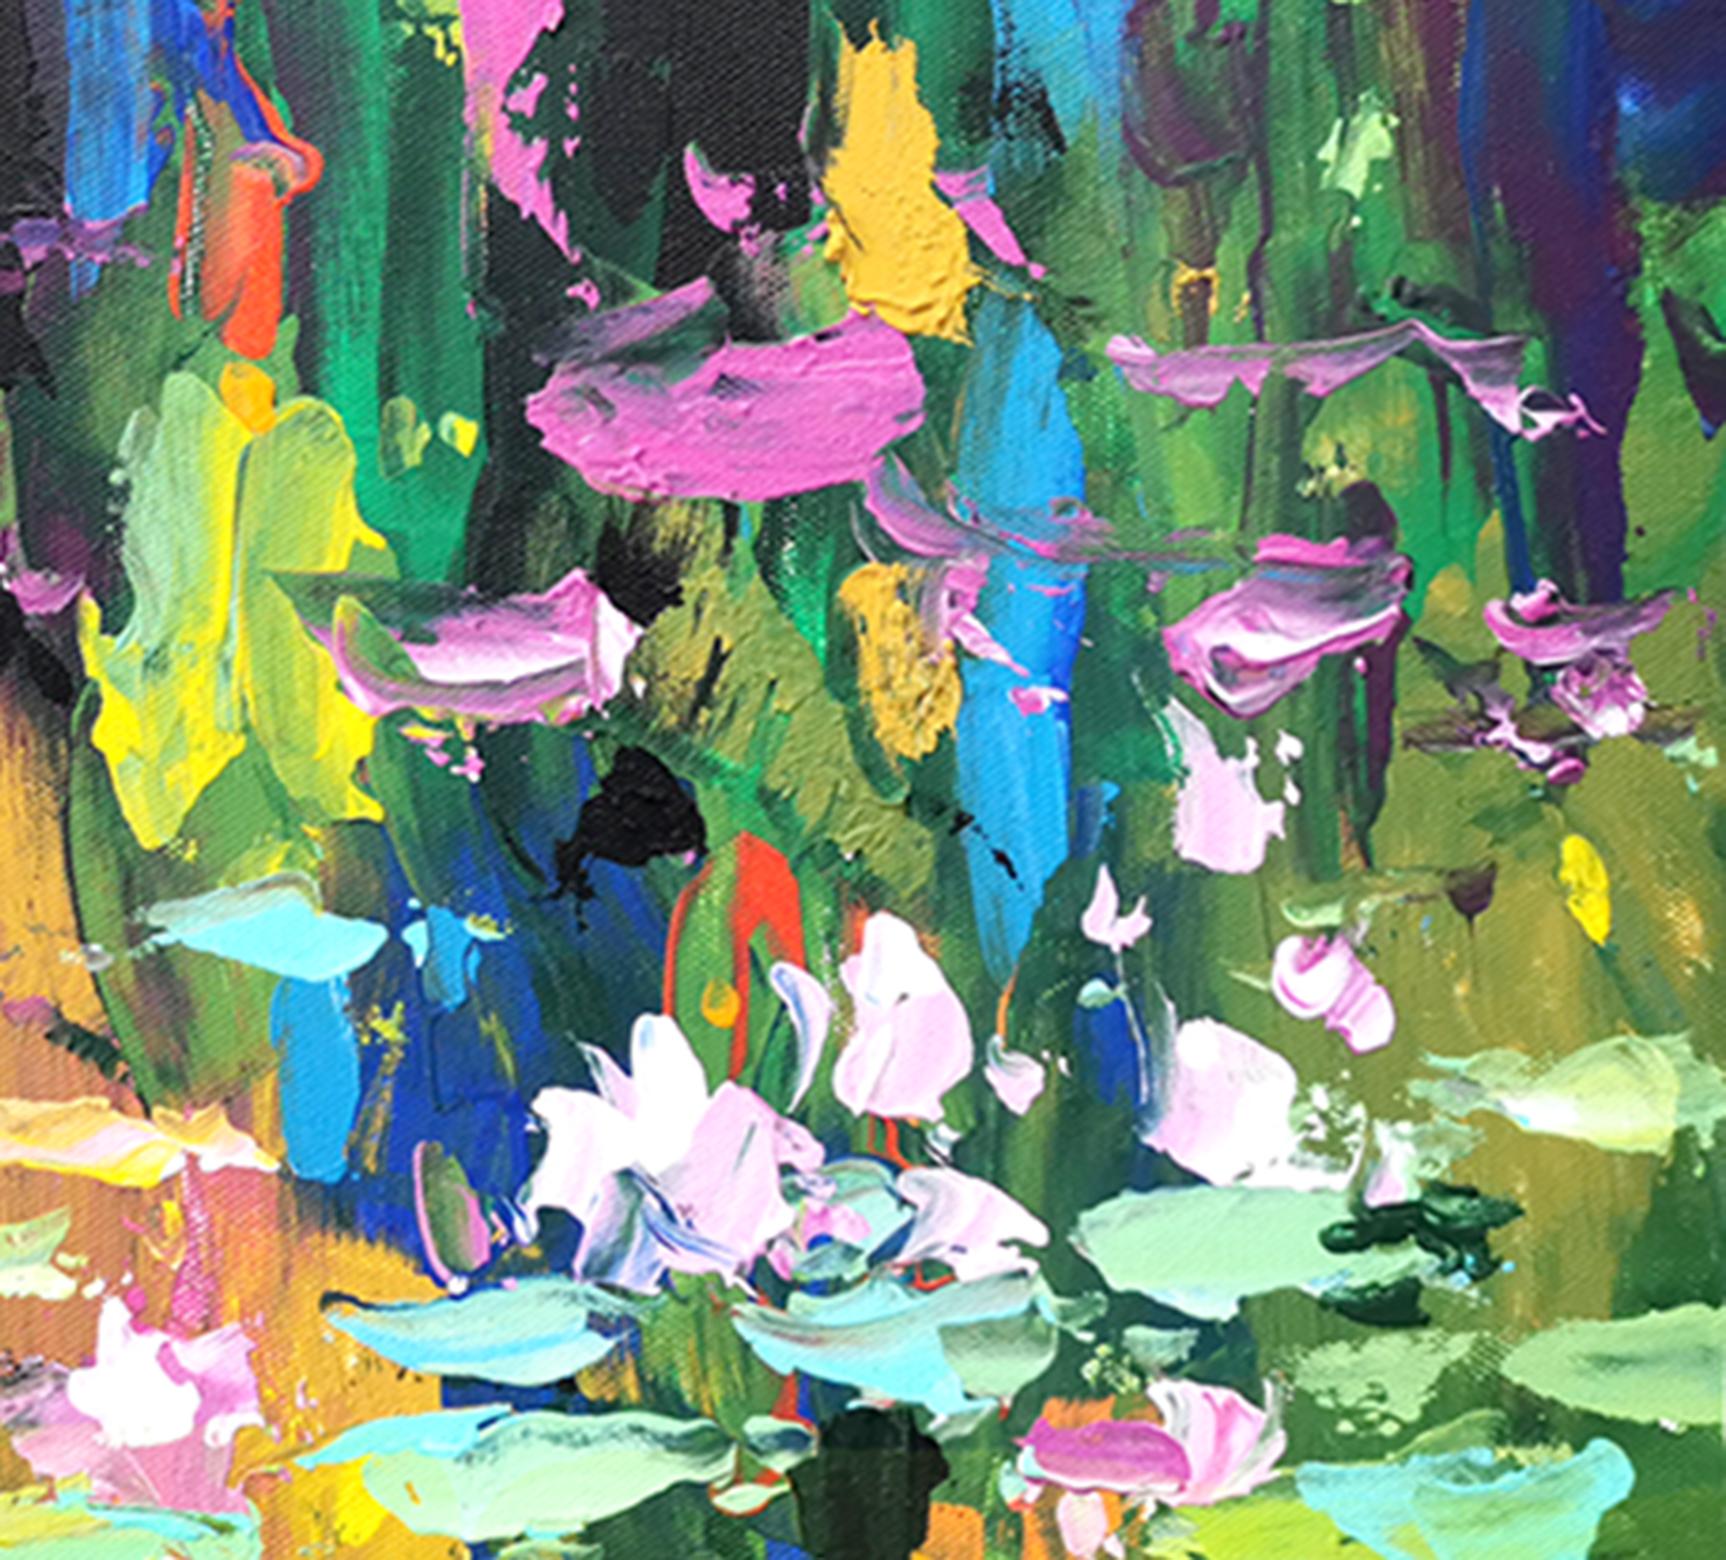 Midday water lilies 2
size: 27